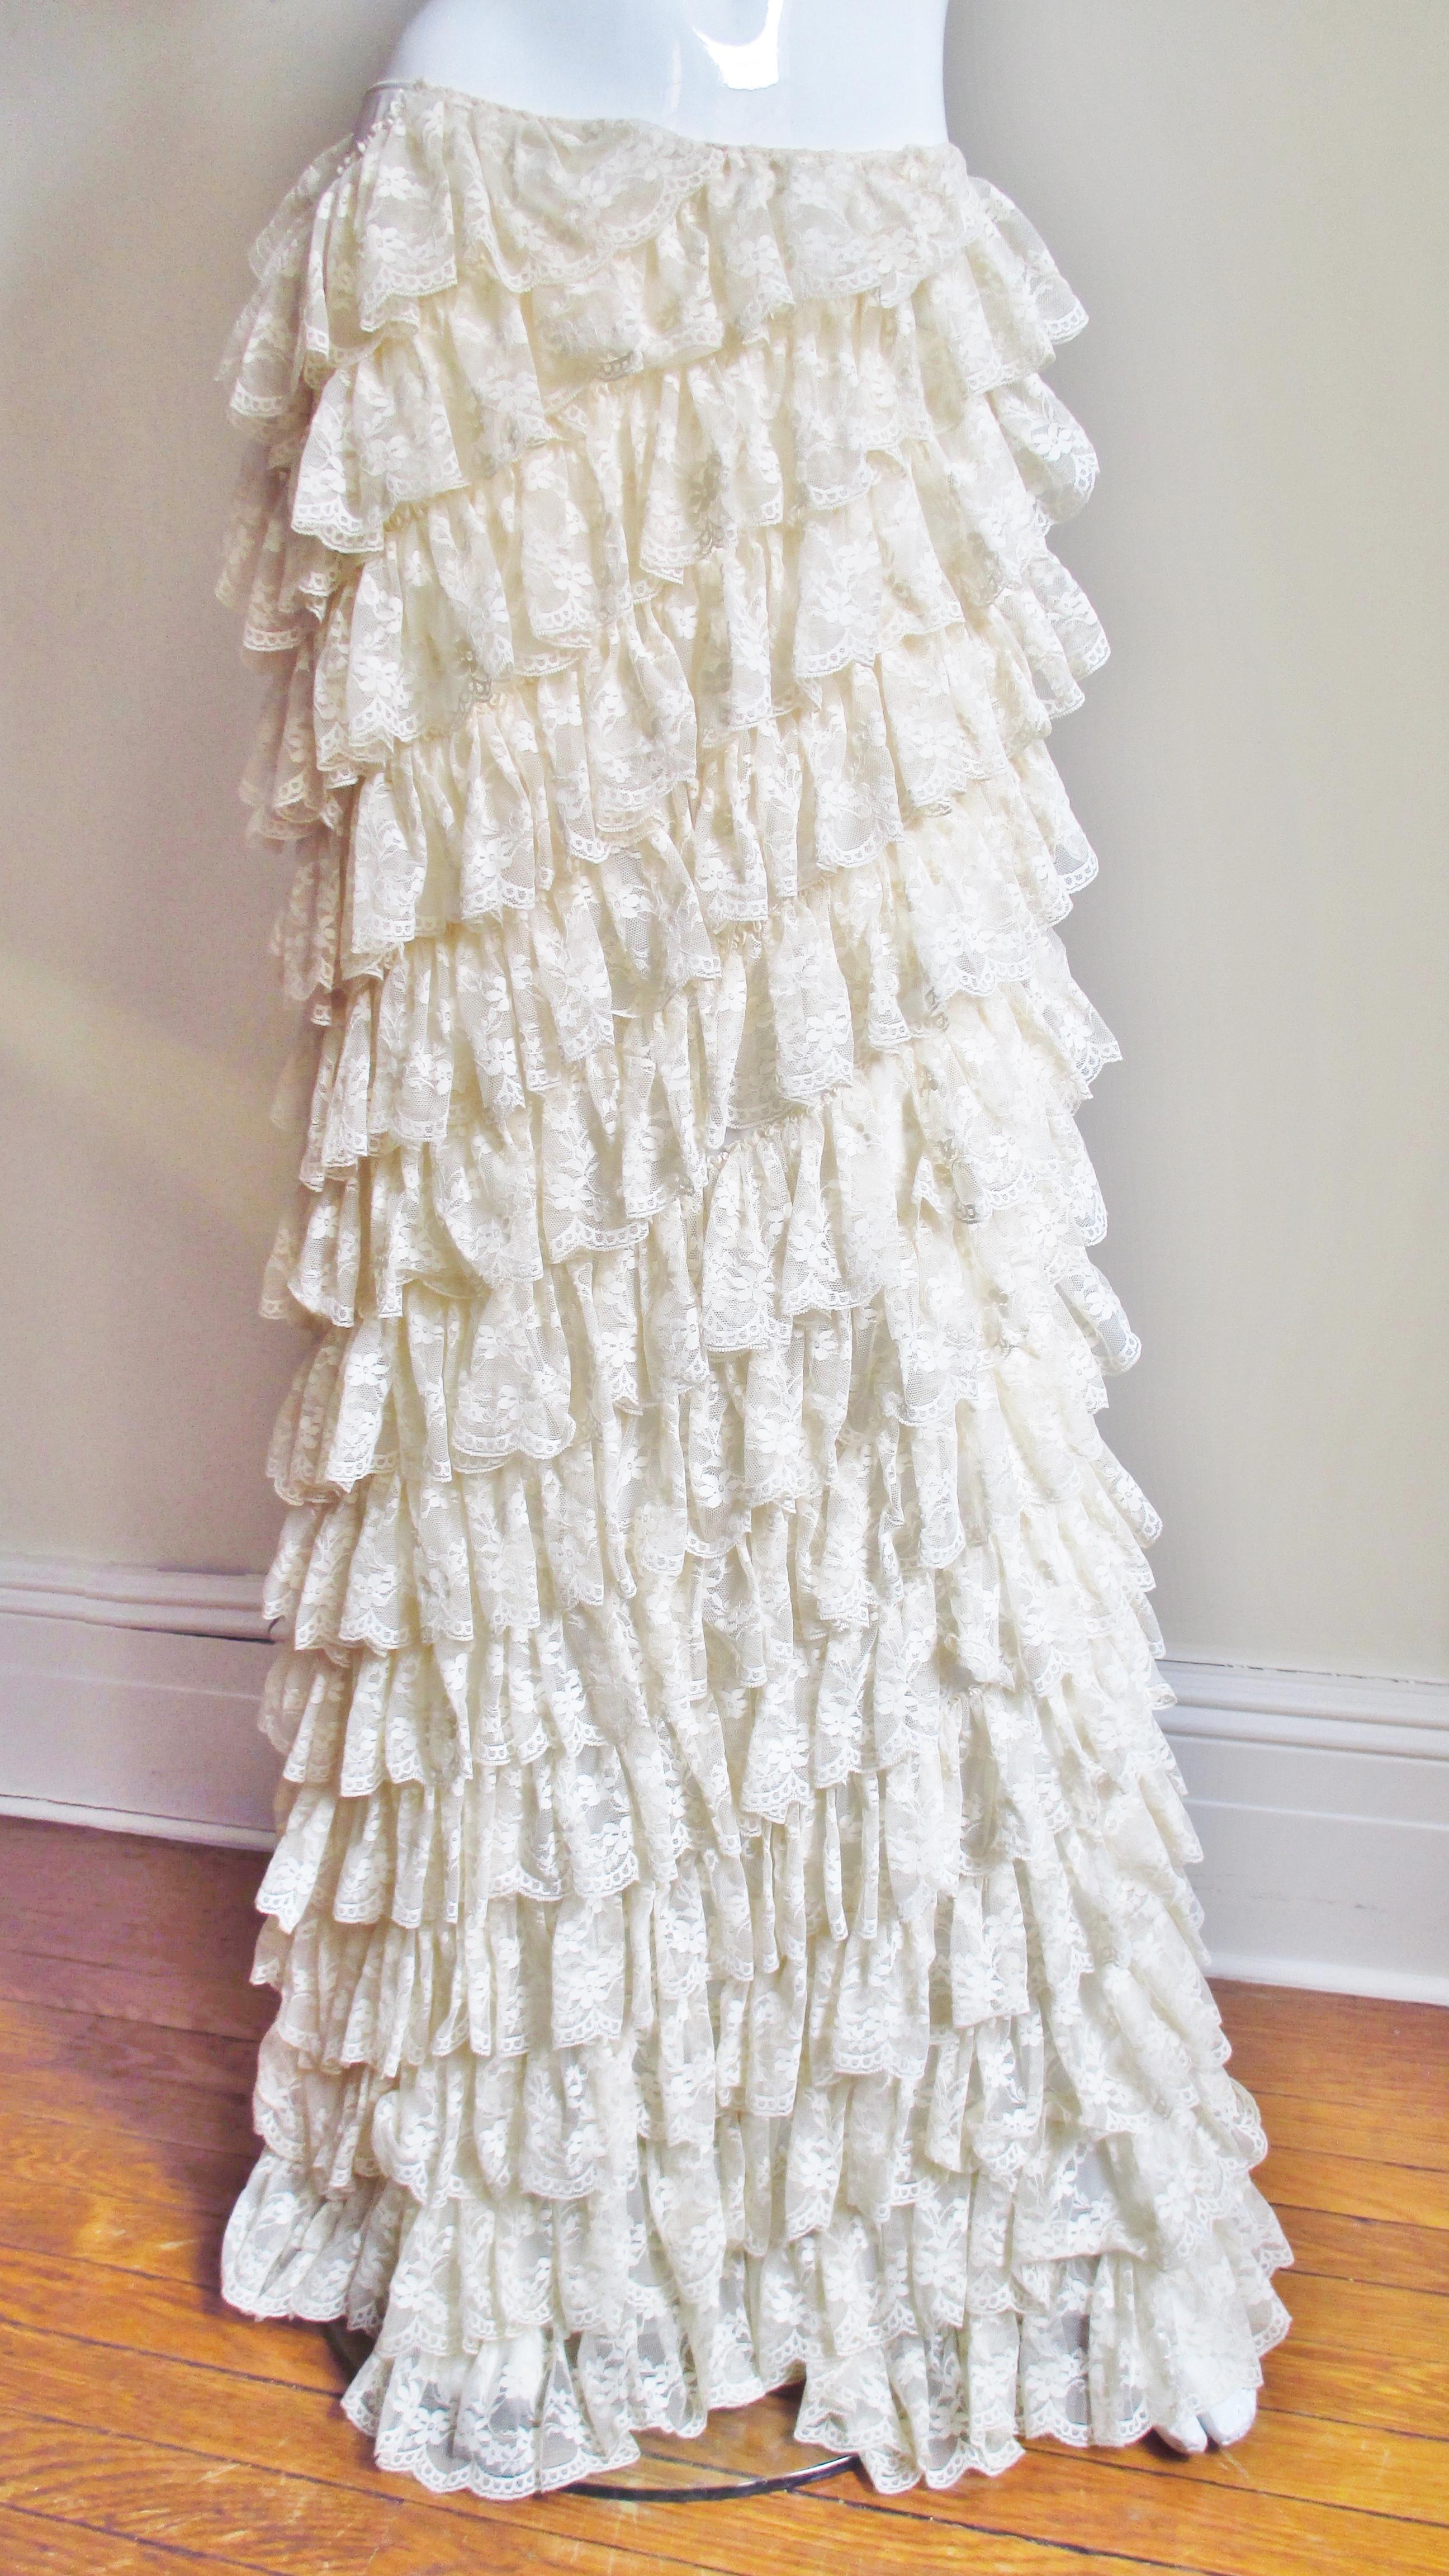 An incredible off white silk maxi skirt from the early collections of Alexander McQueen covered in rows and rows of angled cascading matching lace ruffles. The skirt is slightly longer in the back draping beautifully.  It closes with a matching side